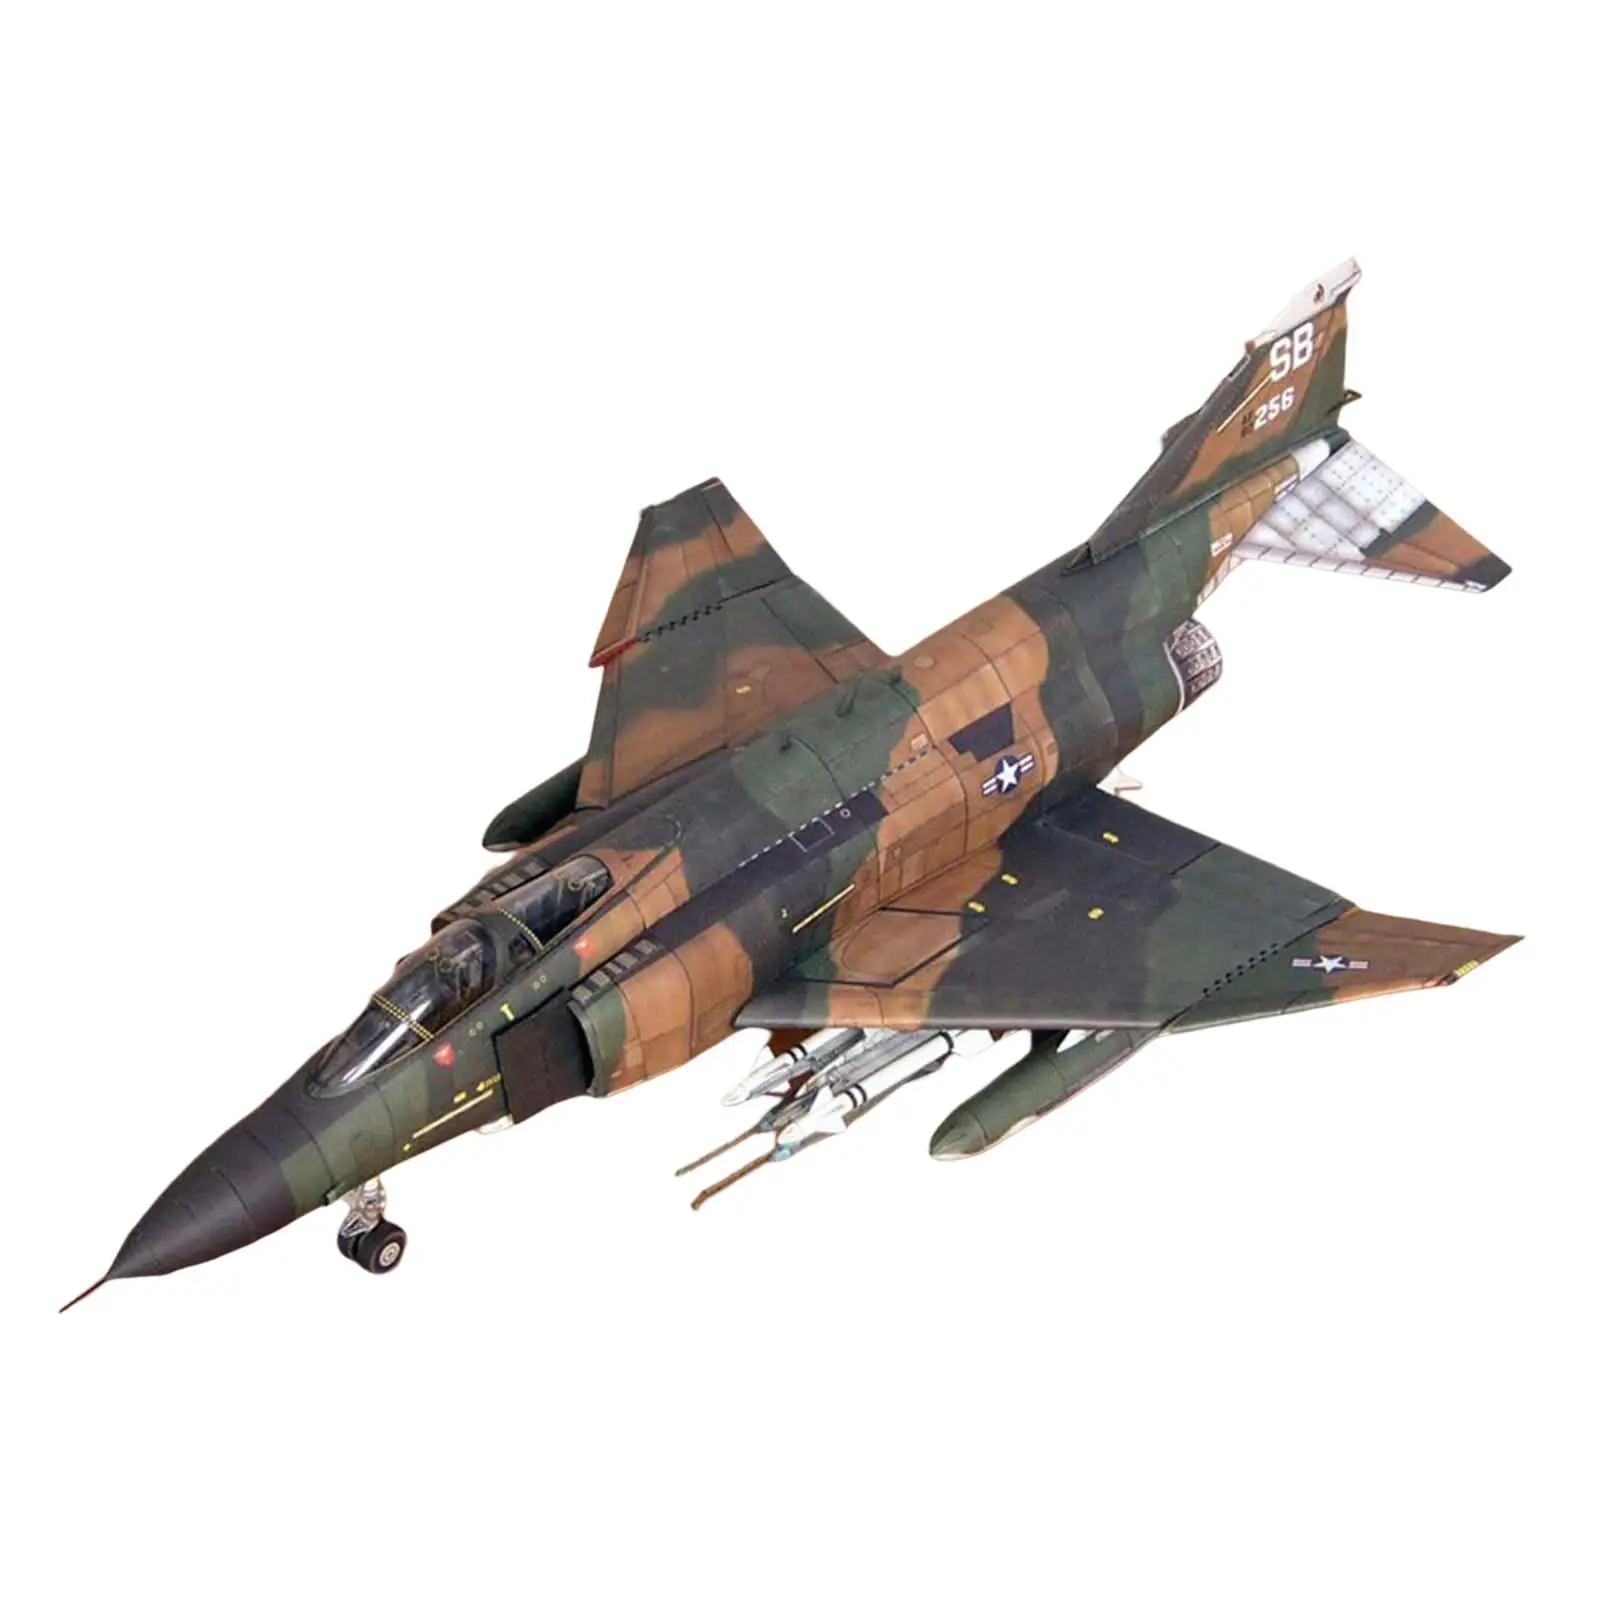 1:33 Scale American Plane Model Puzzle Toy DIY F-4B Display Ornaments Fighter Model for Desktop Office Table Collectibles Gift